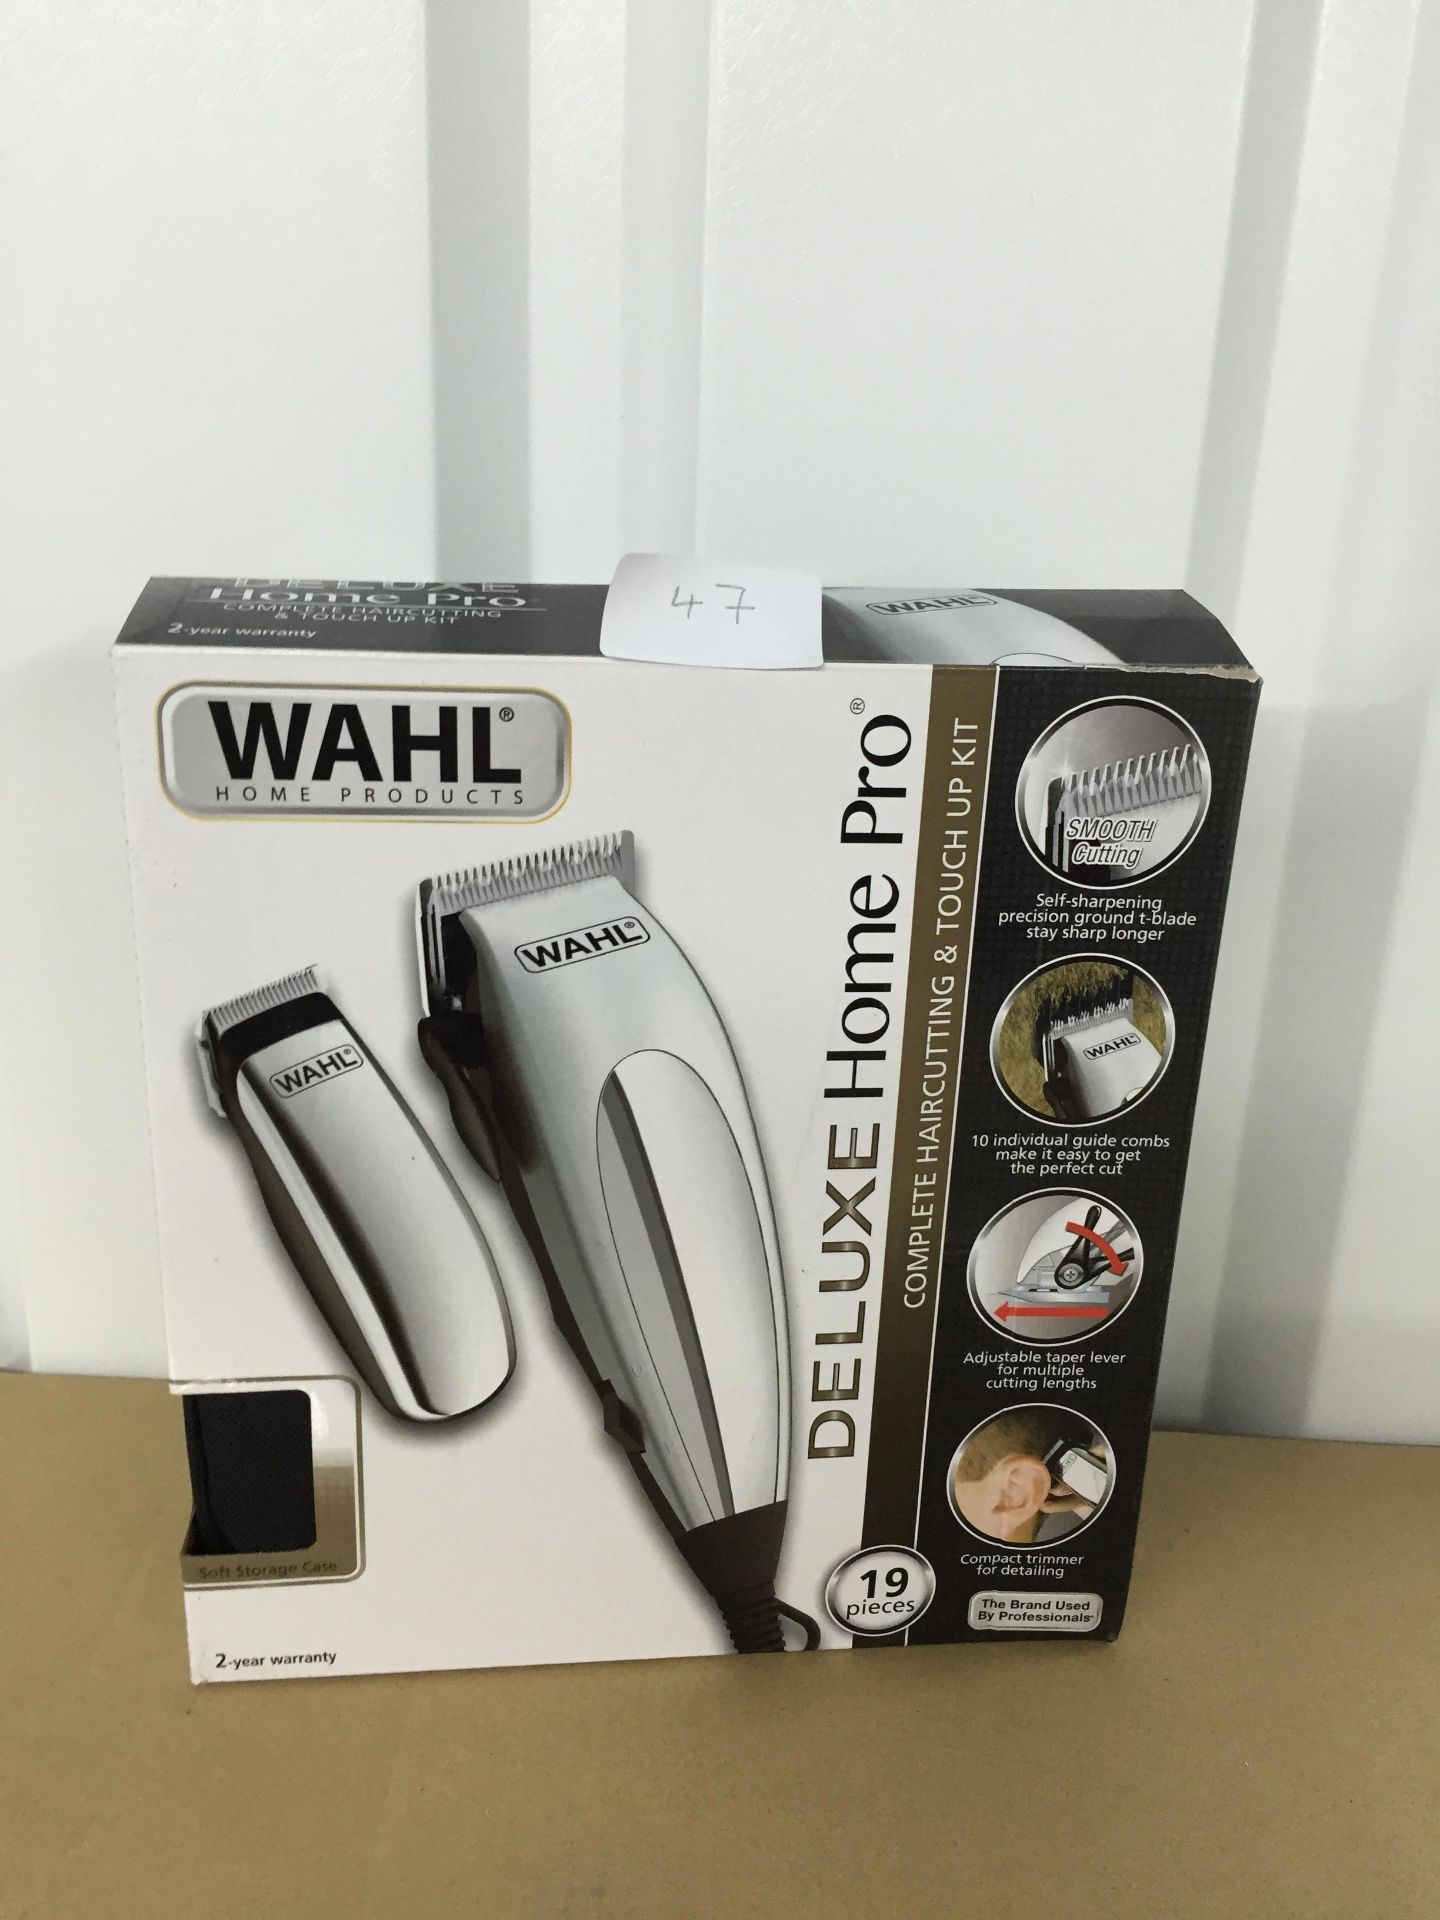 Wahl Deluxe Home Pro Multi hair trimmer